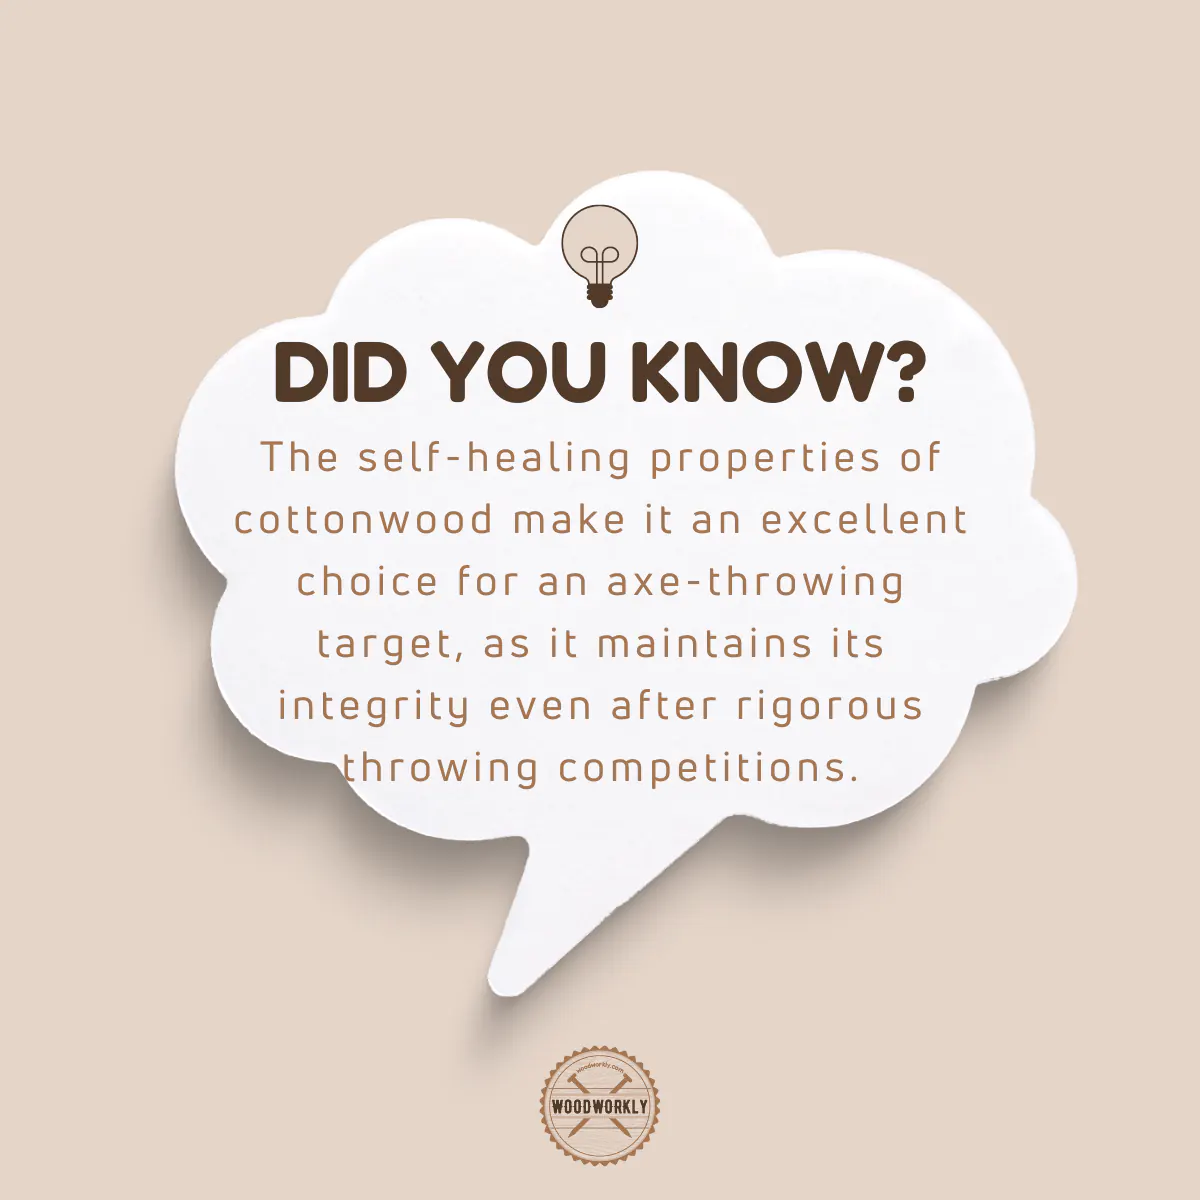 Did you know fact about finding bet wood for axe throwing target